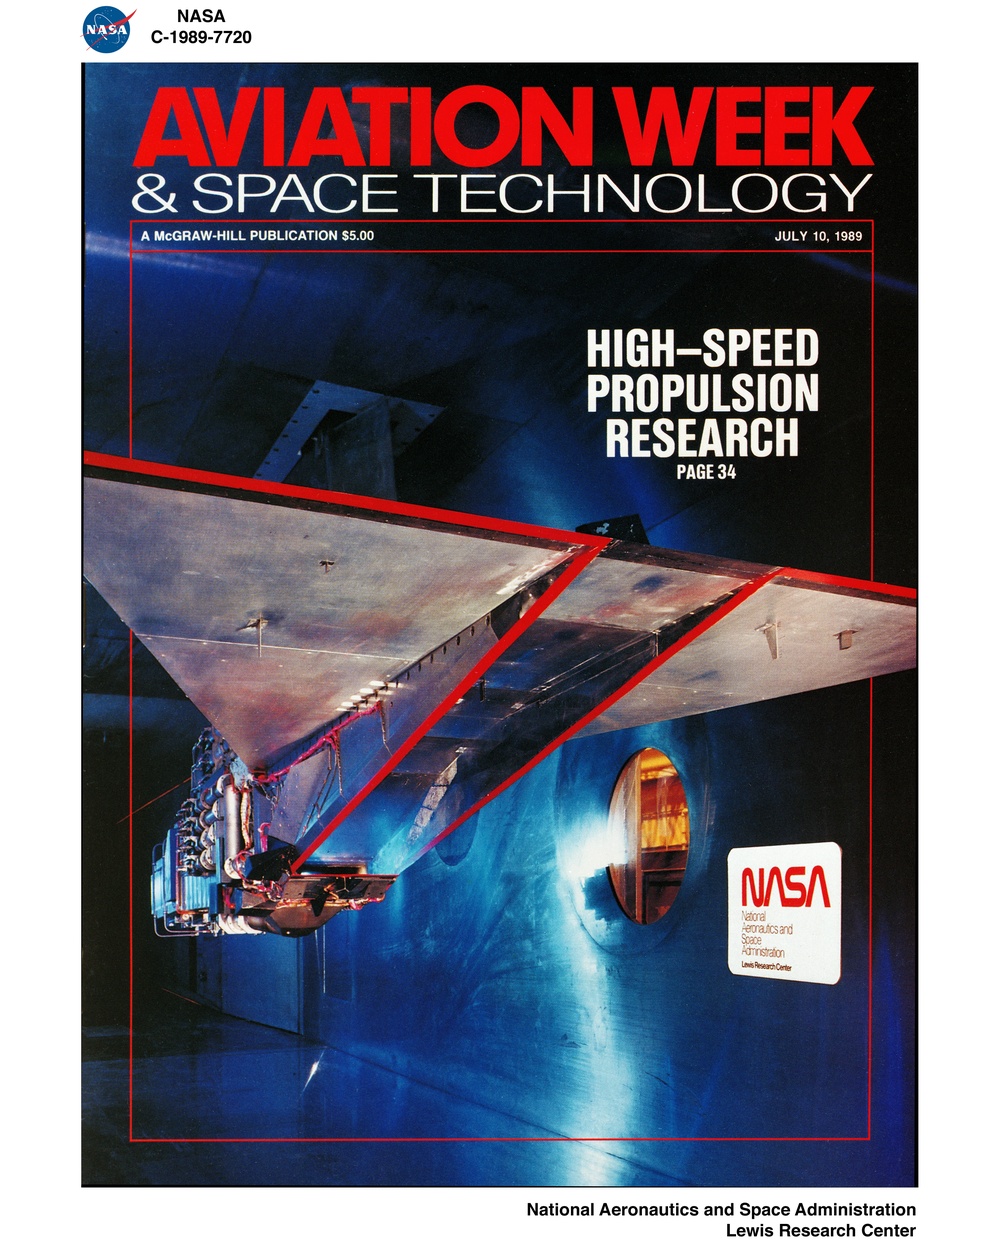 AVIATION WEEK AND SPACE TECHNOLOGY COVER 7/10/89